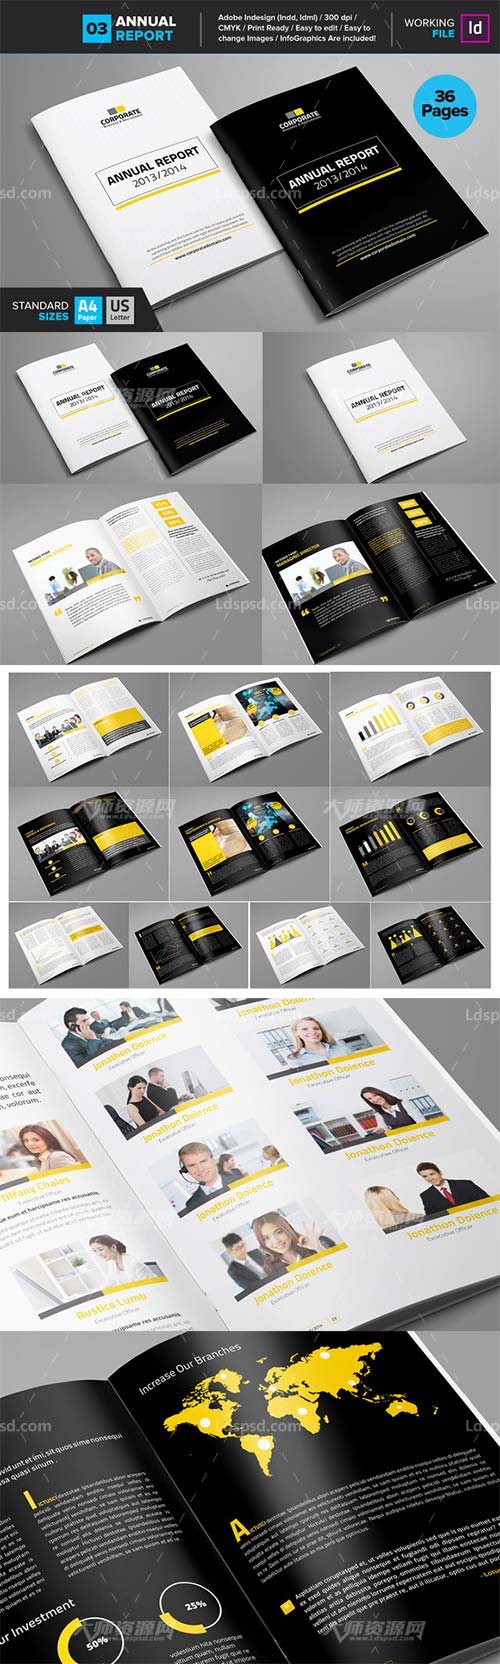 Clean Corporate Annual Report_V3,indesign模板－年终报刊(36页/通用型)